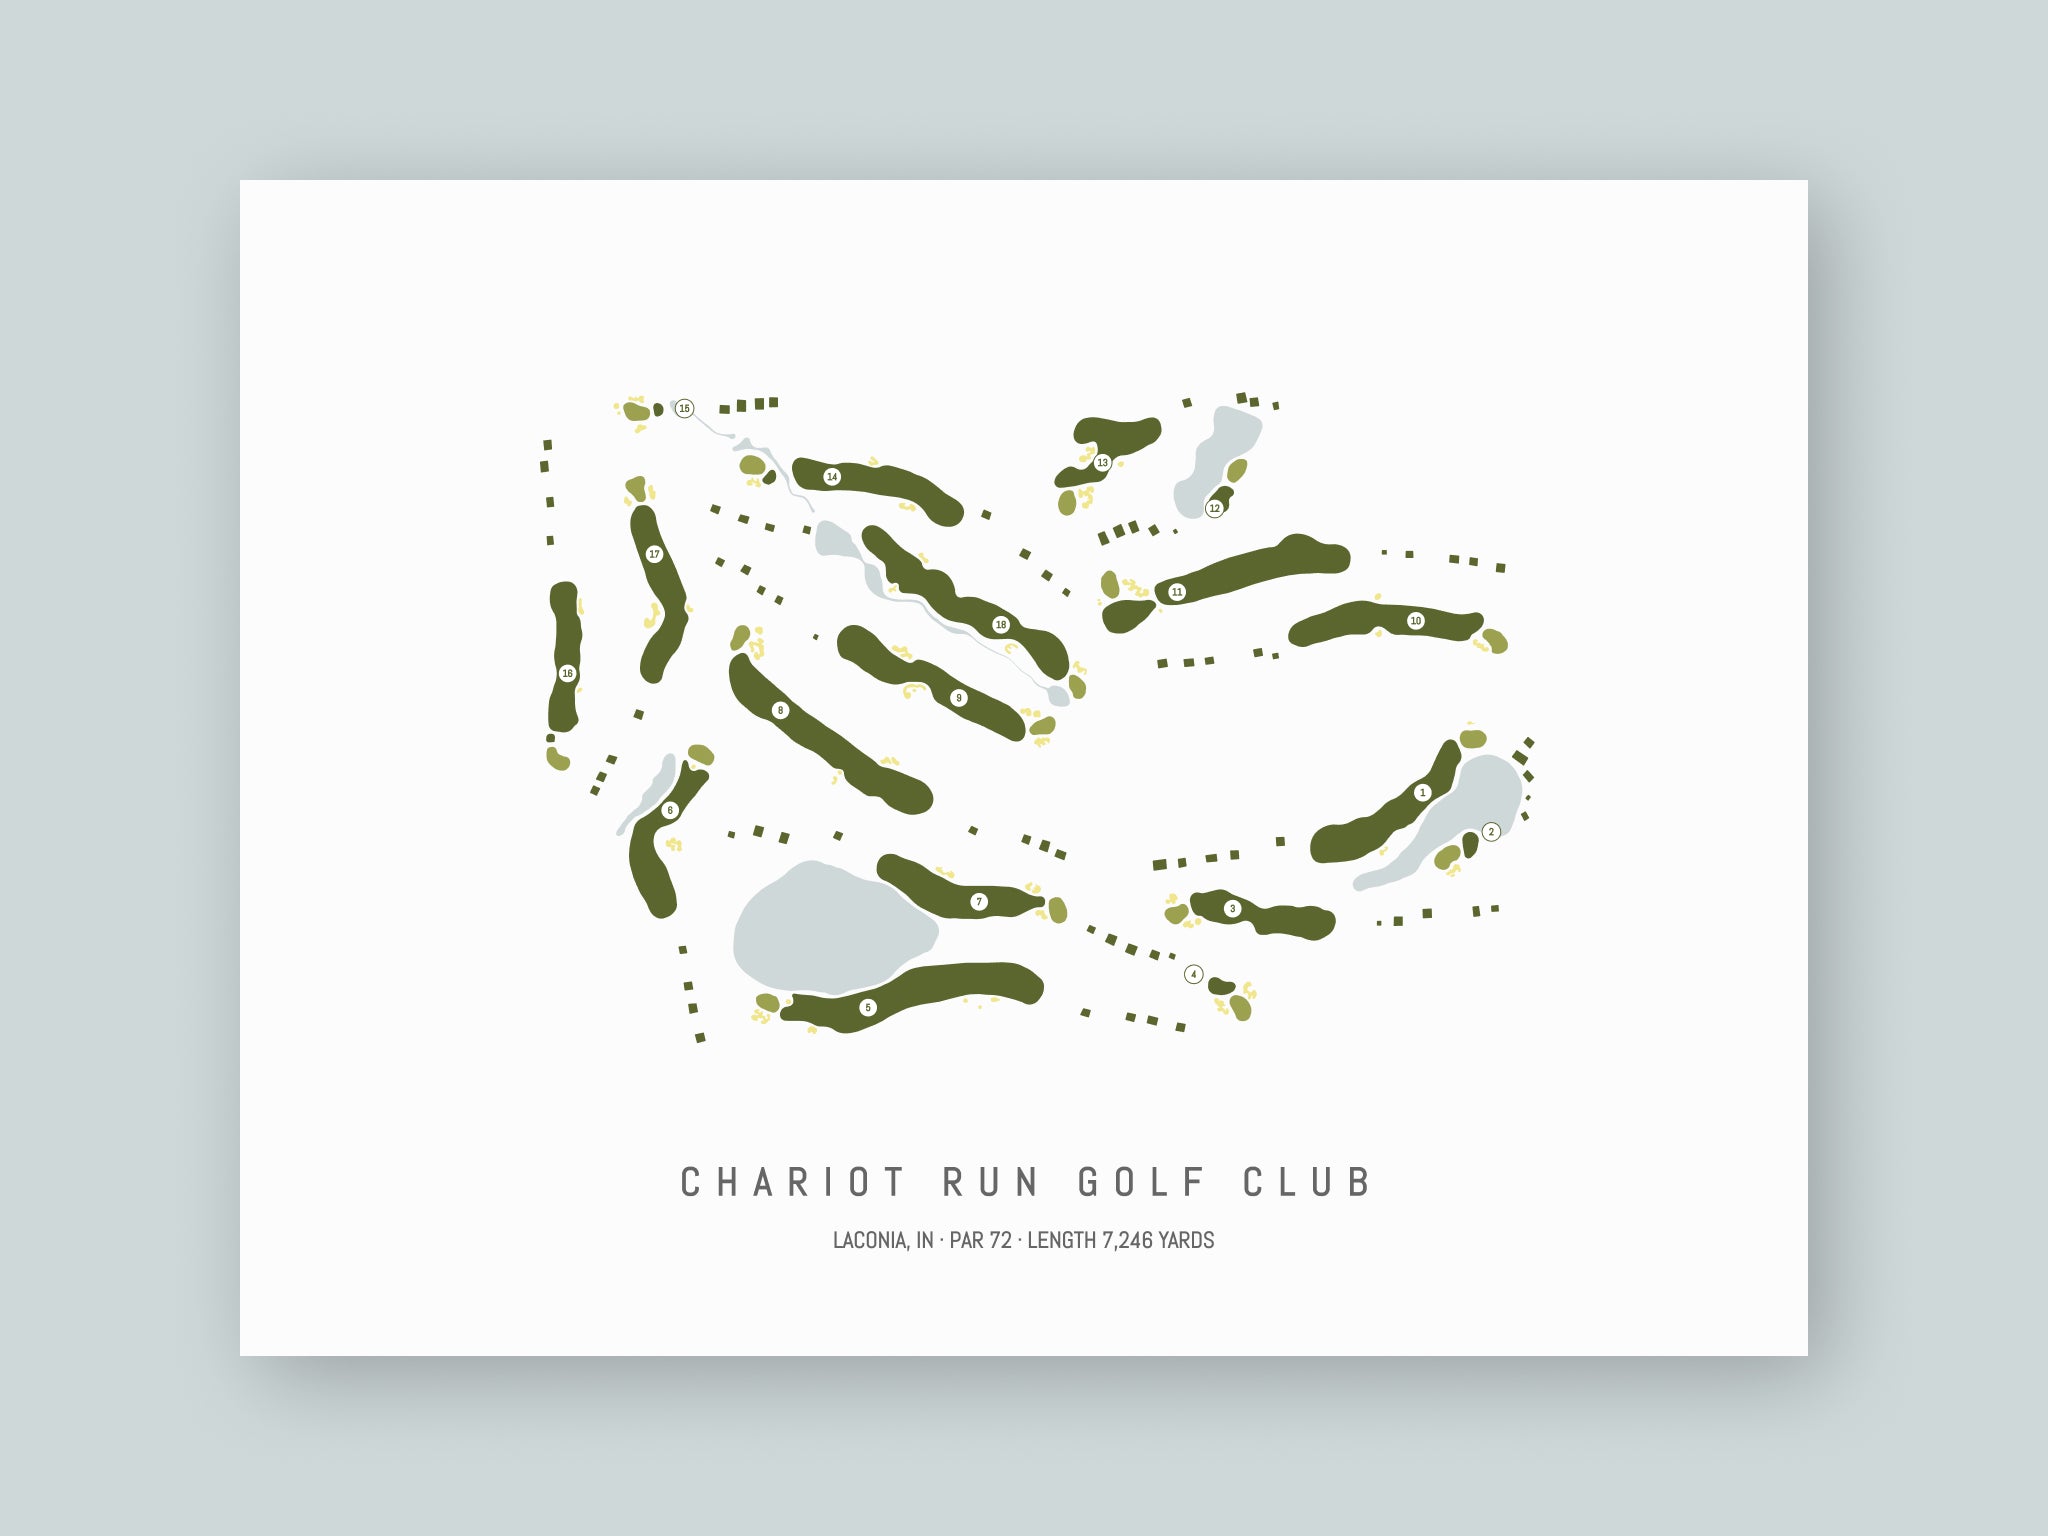 Chariot-Run-Golf-Club-IN--Unframed-24x18-With-Hole-Numbers